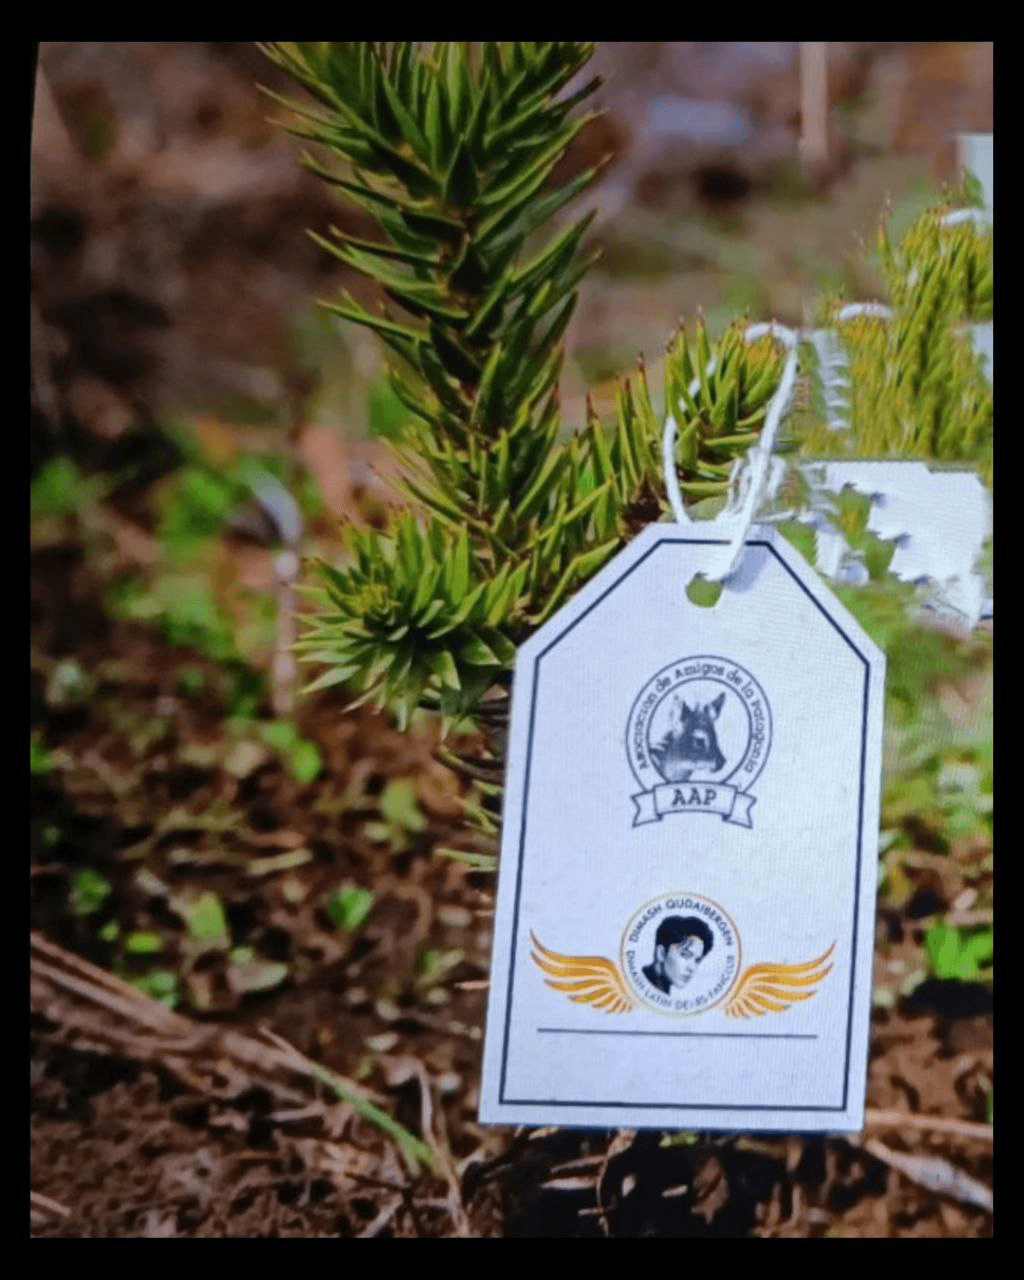 Dimash's fans planted 1000 trees in Argentina